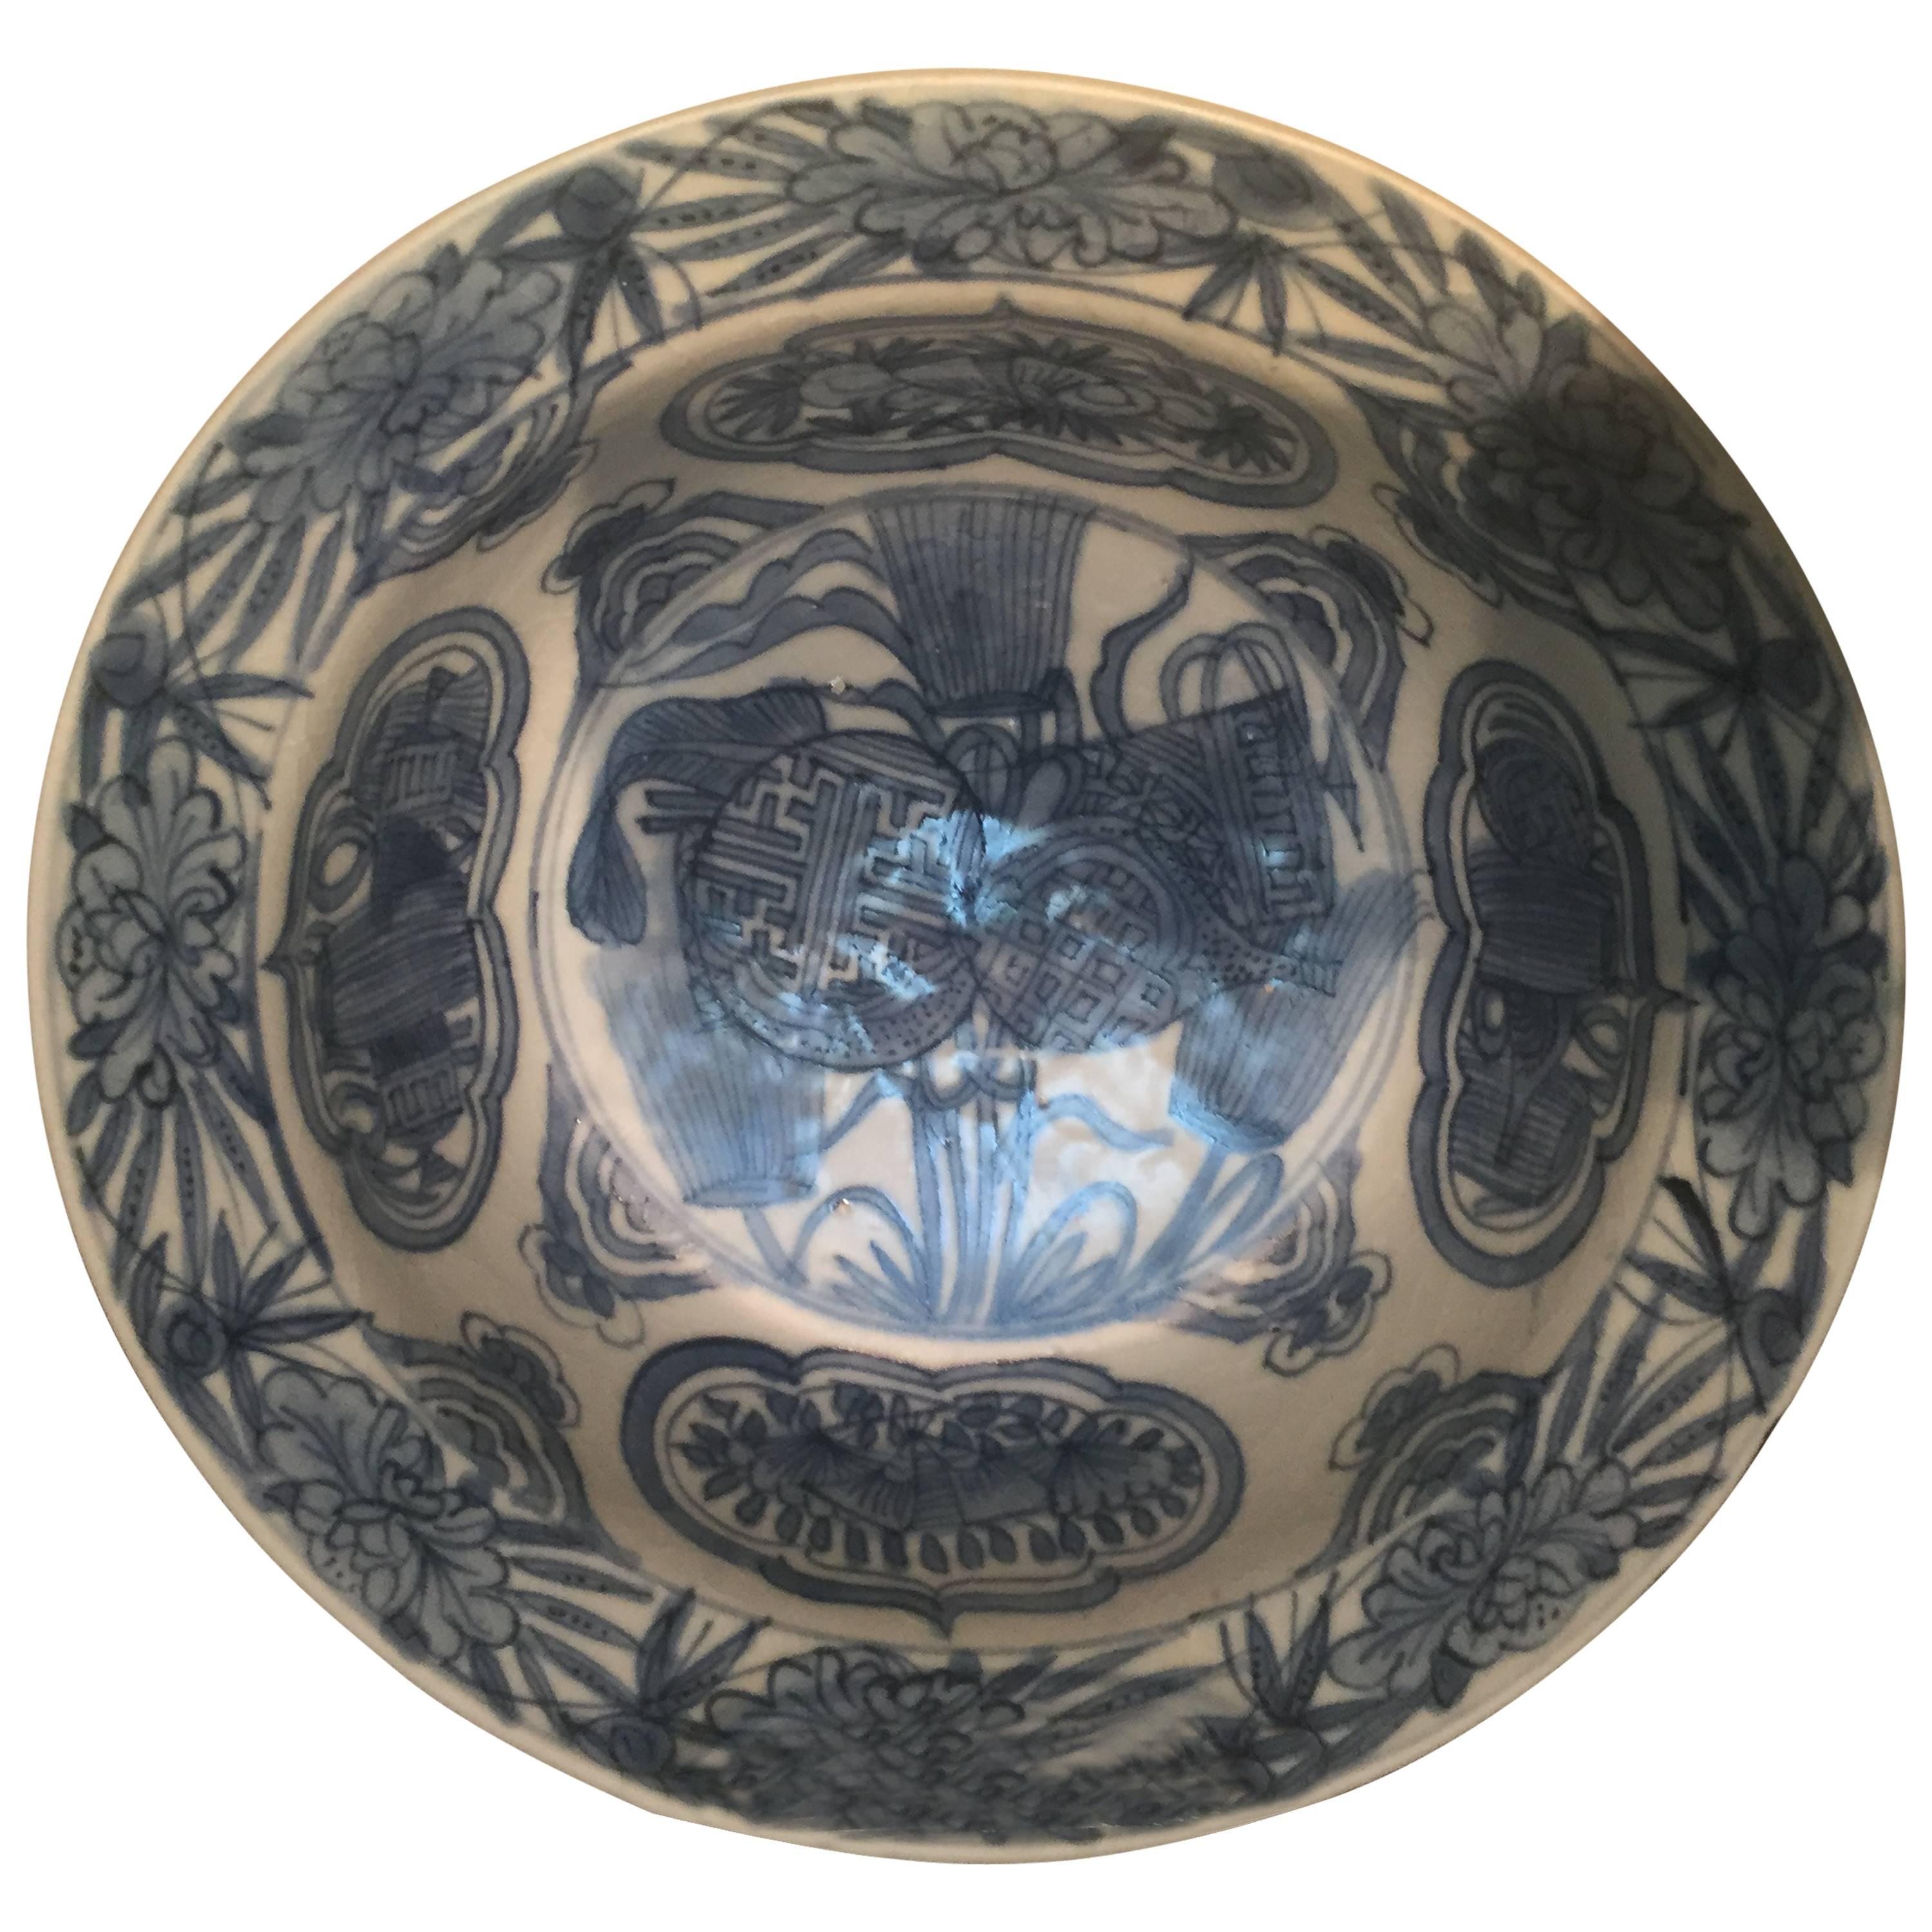 Deep Plate, Blue and White Porcelain, Ming Dynasty, China